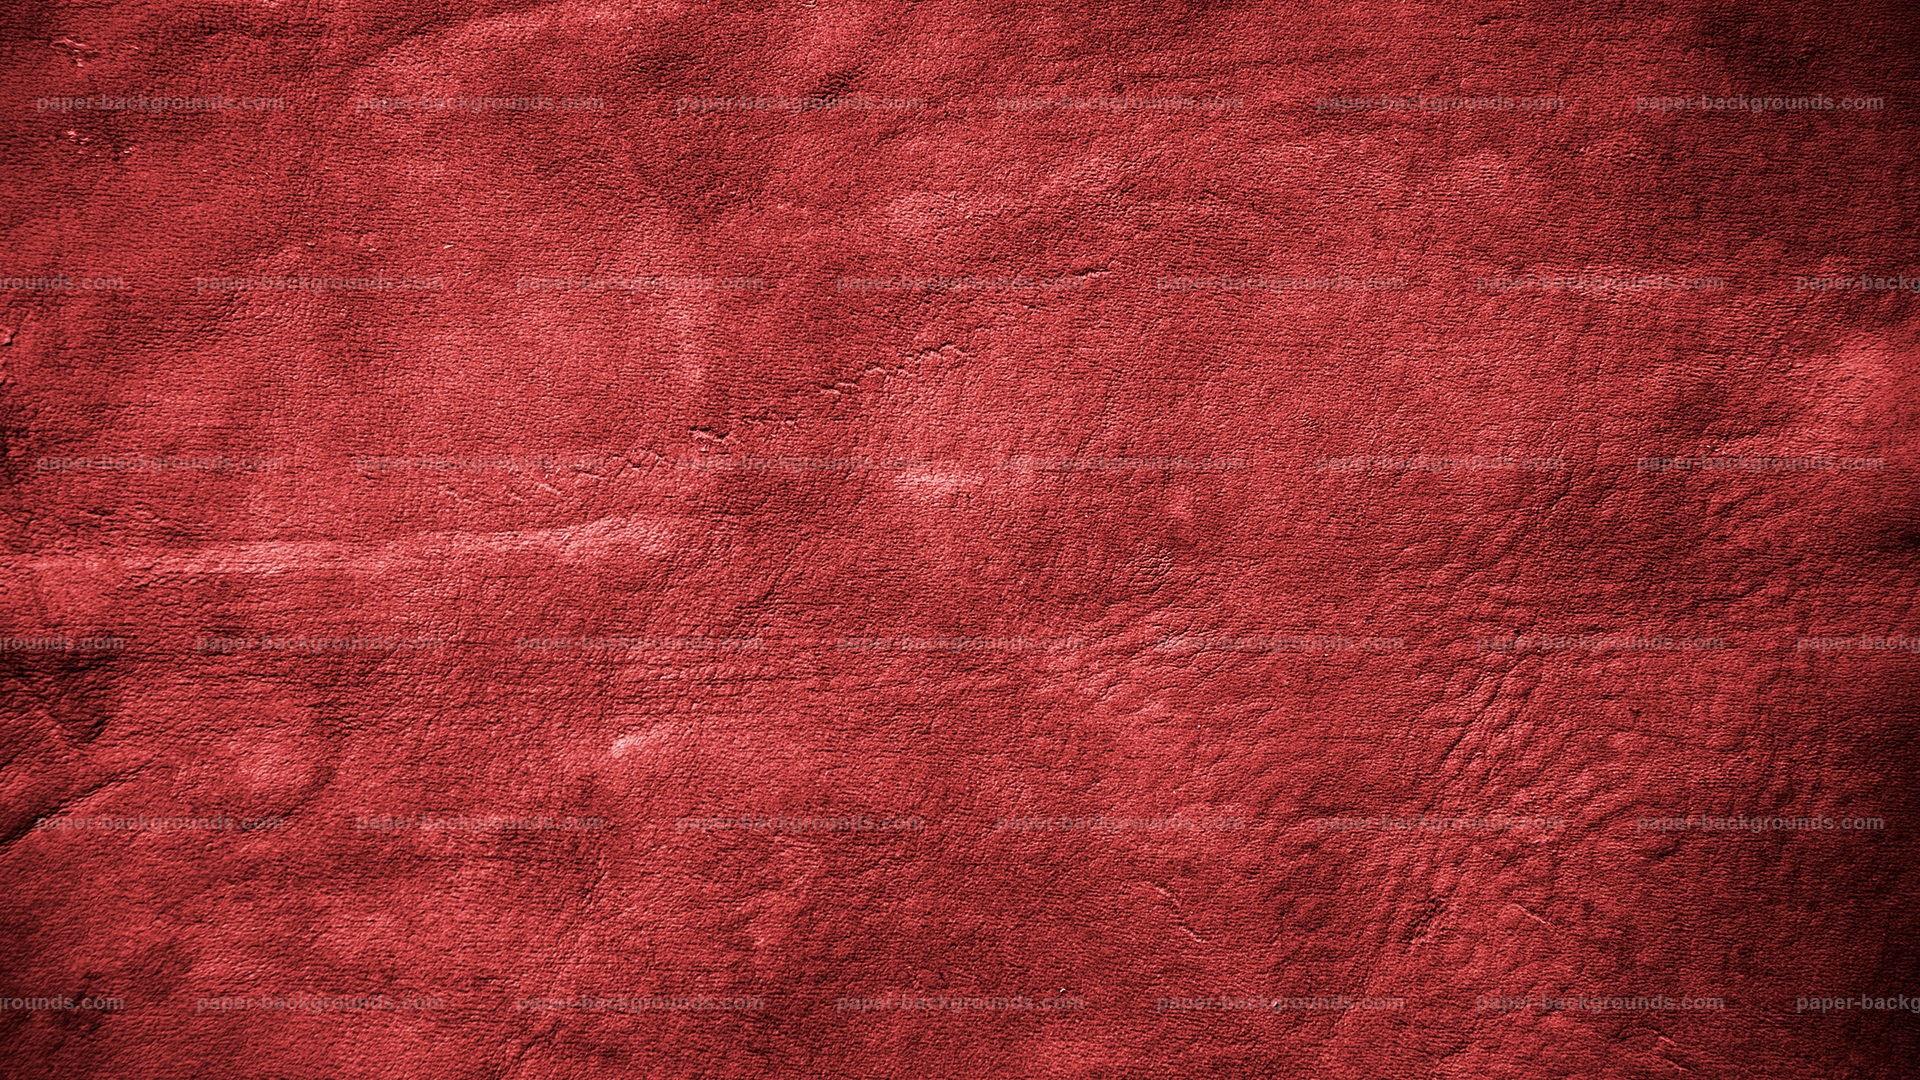 Paper Background Vintage Red Soft Leather Texture Background